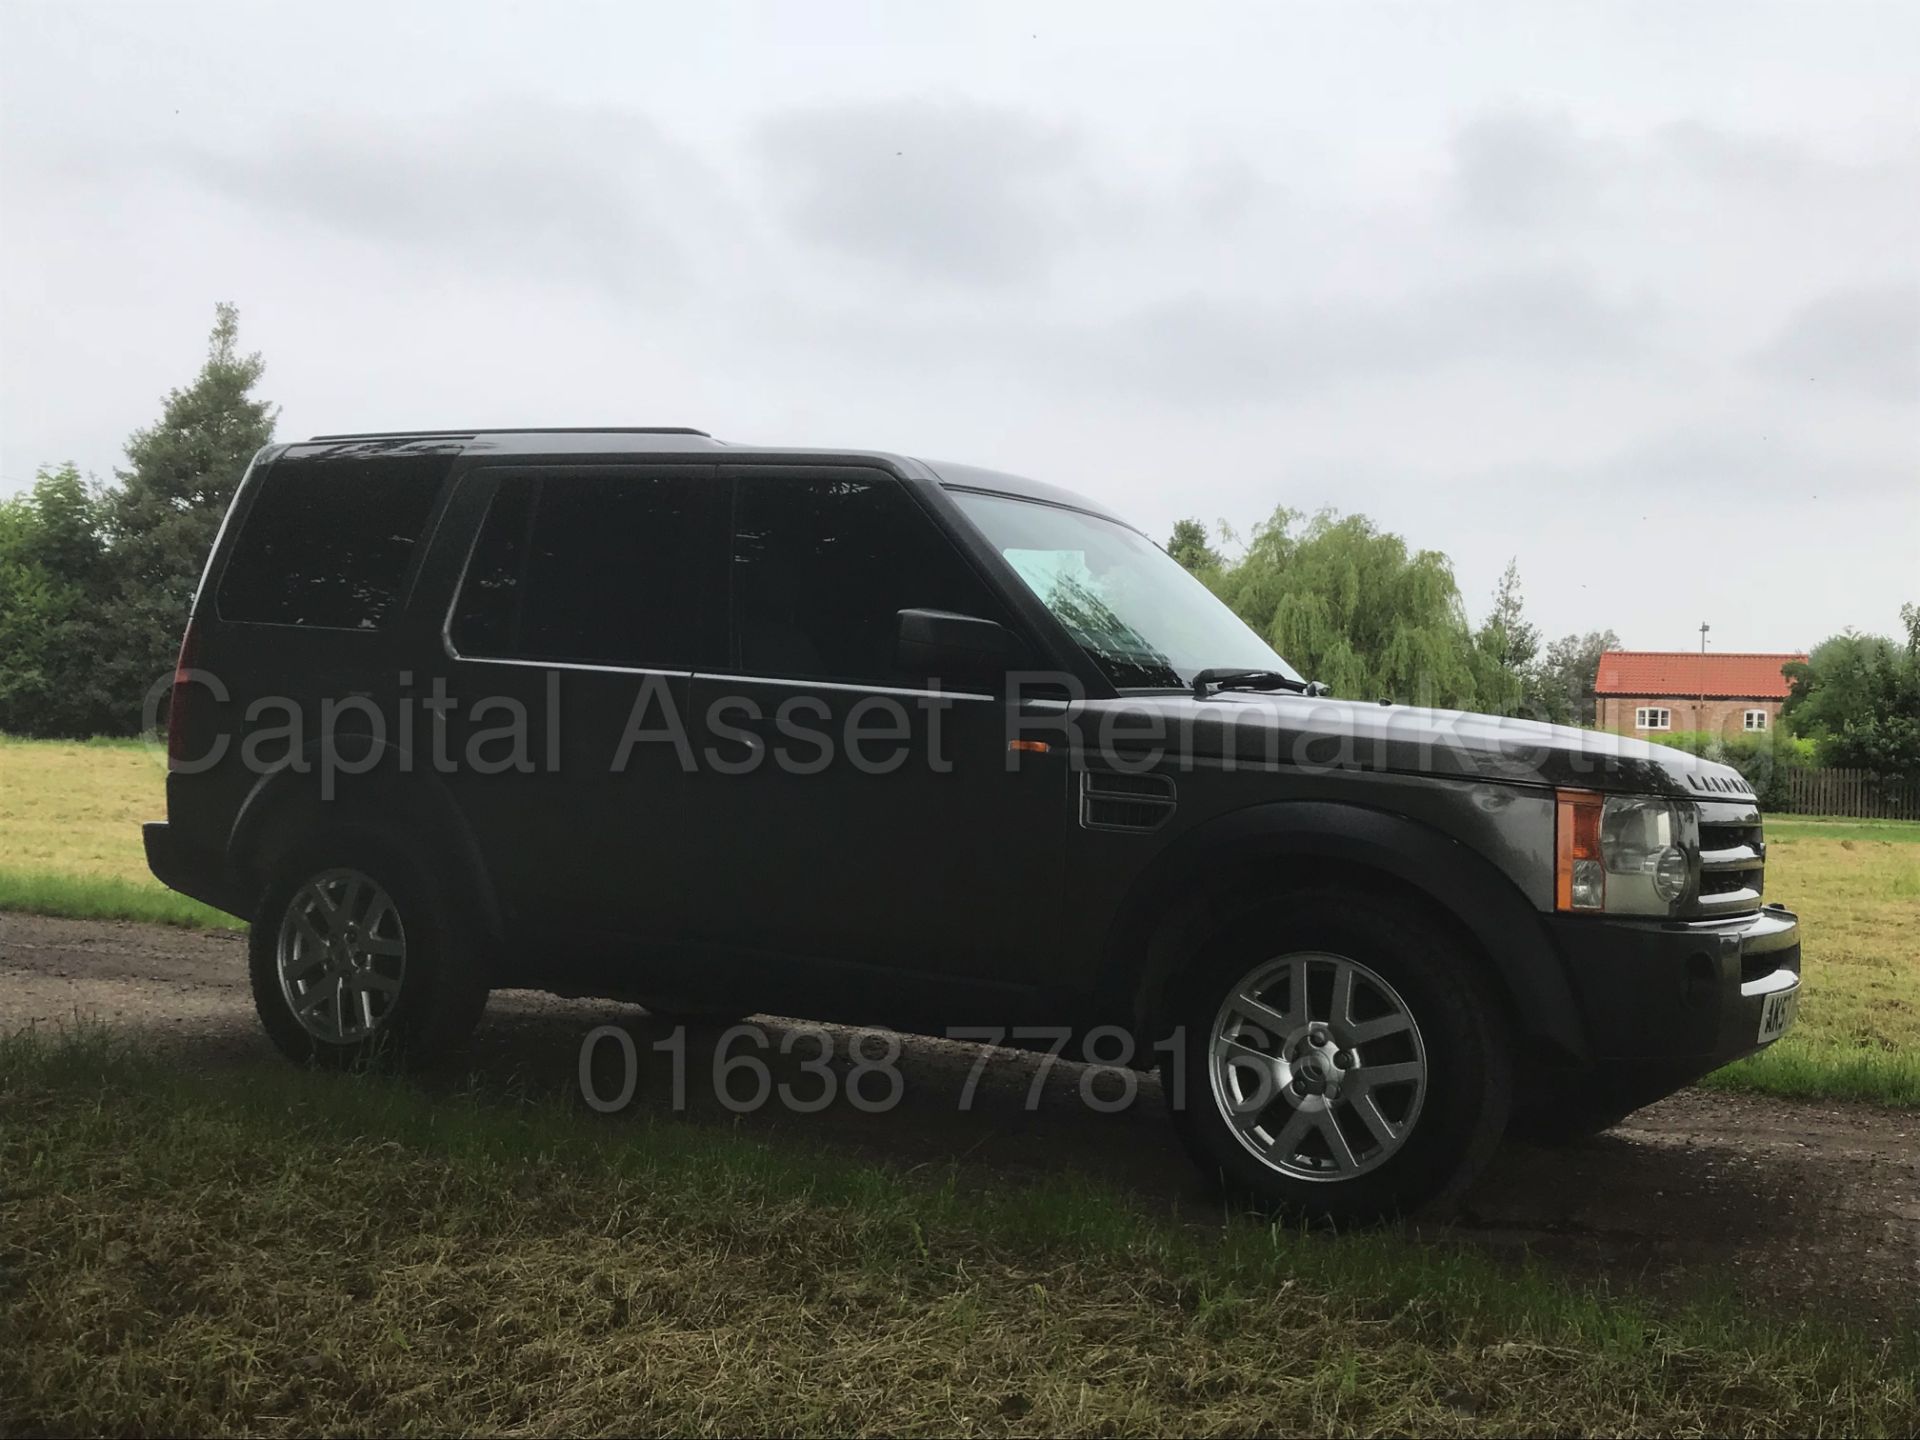 (On Sale) LAND ROVER DISCOVERY 3 'XS EDITION' **COMMERCIAL VAN**(2008 MODEL) 'TDV6-190 BHP' (NO VAT) - Image 12 of 38